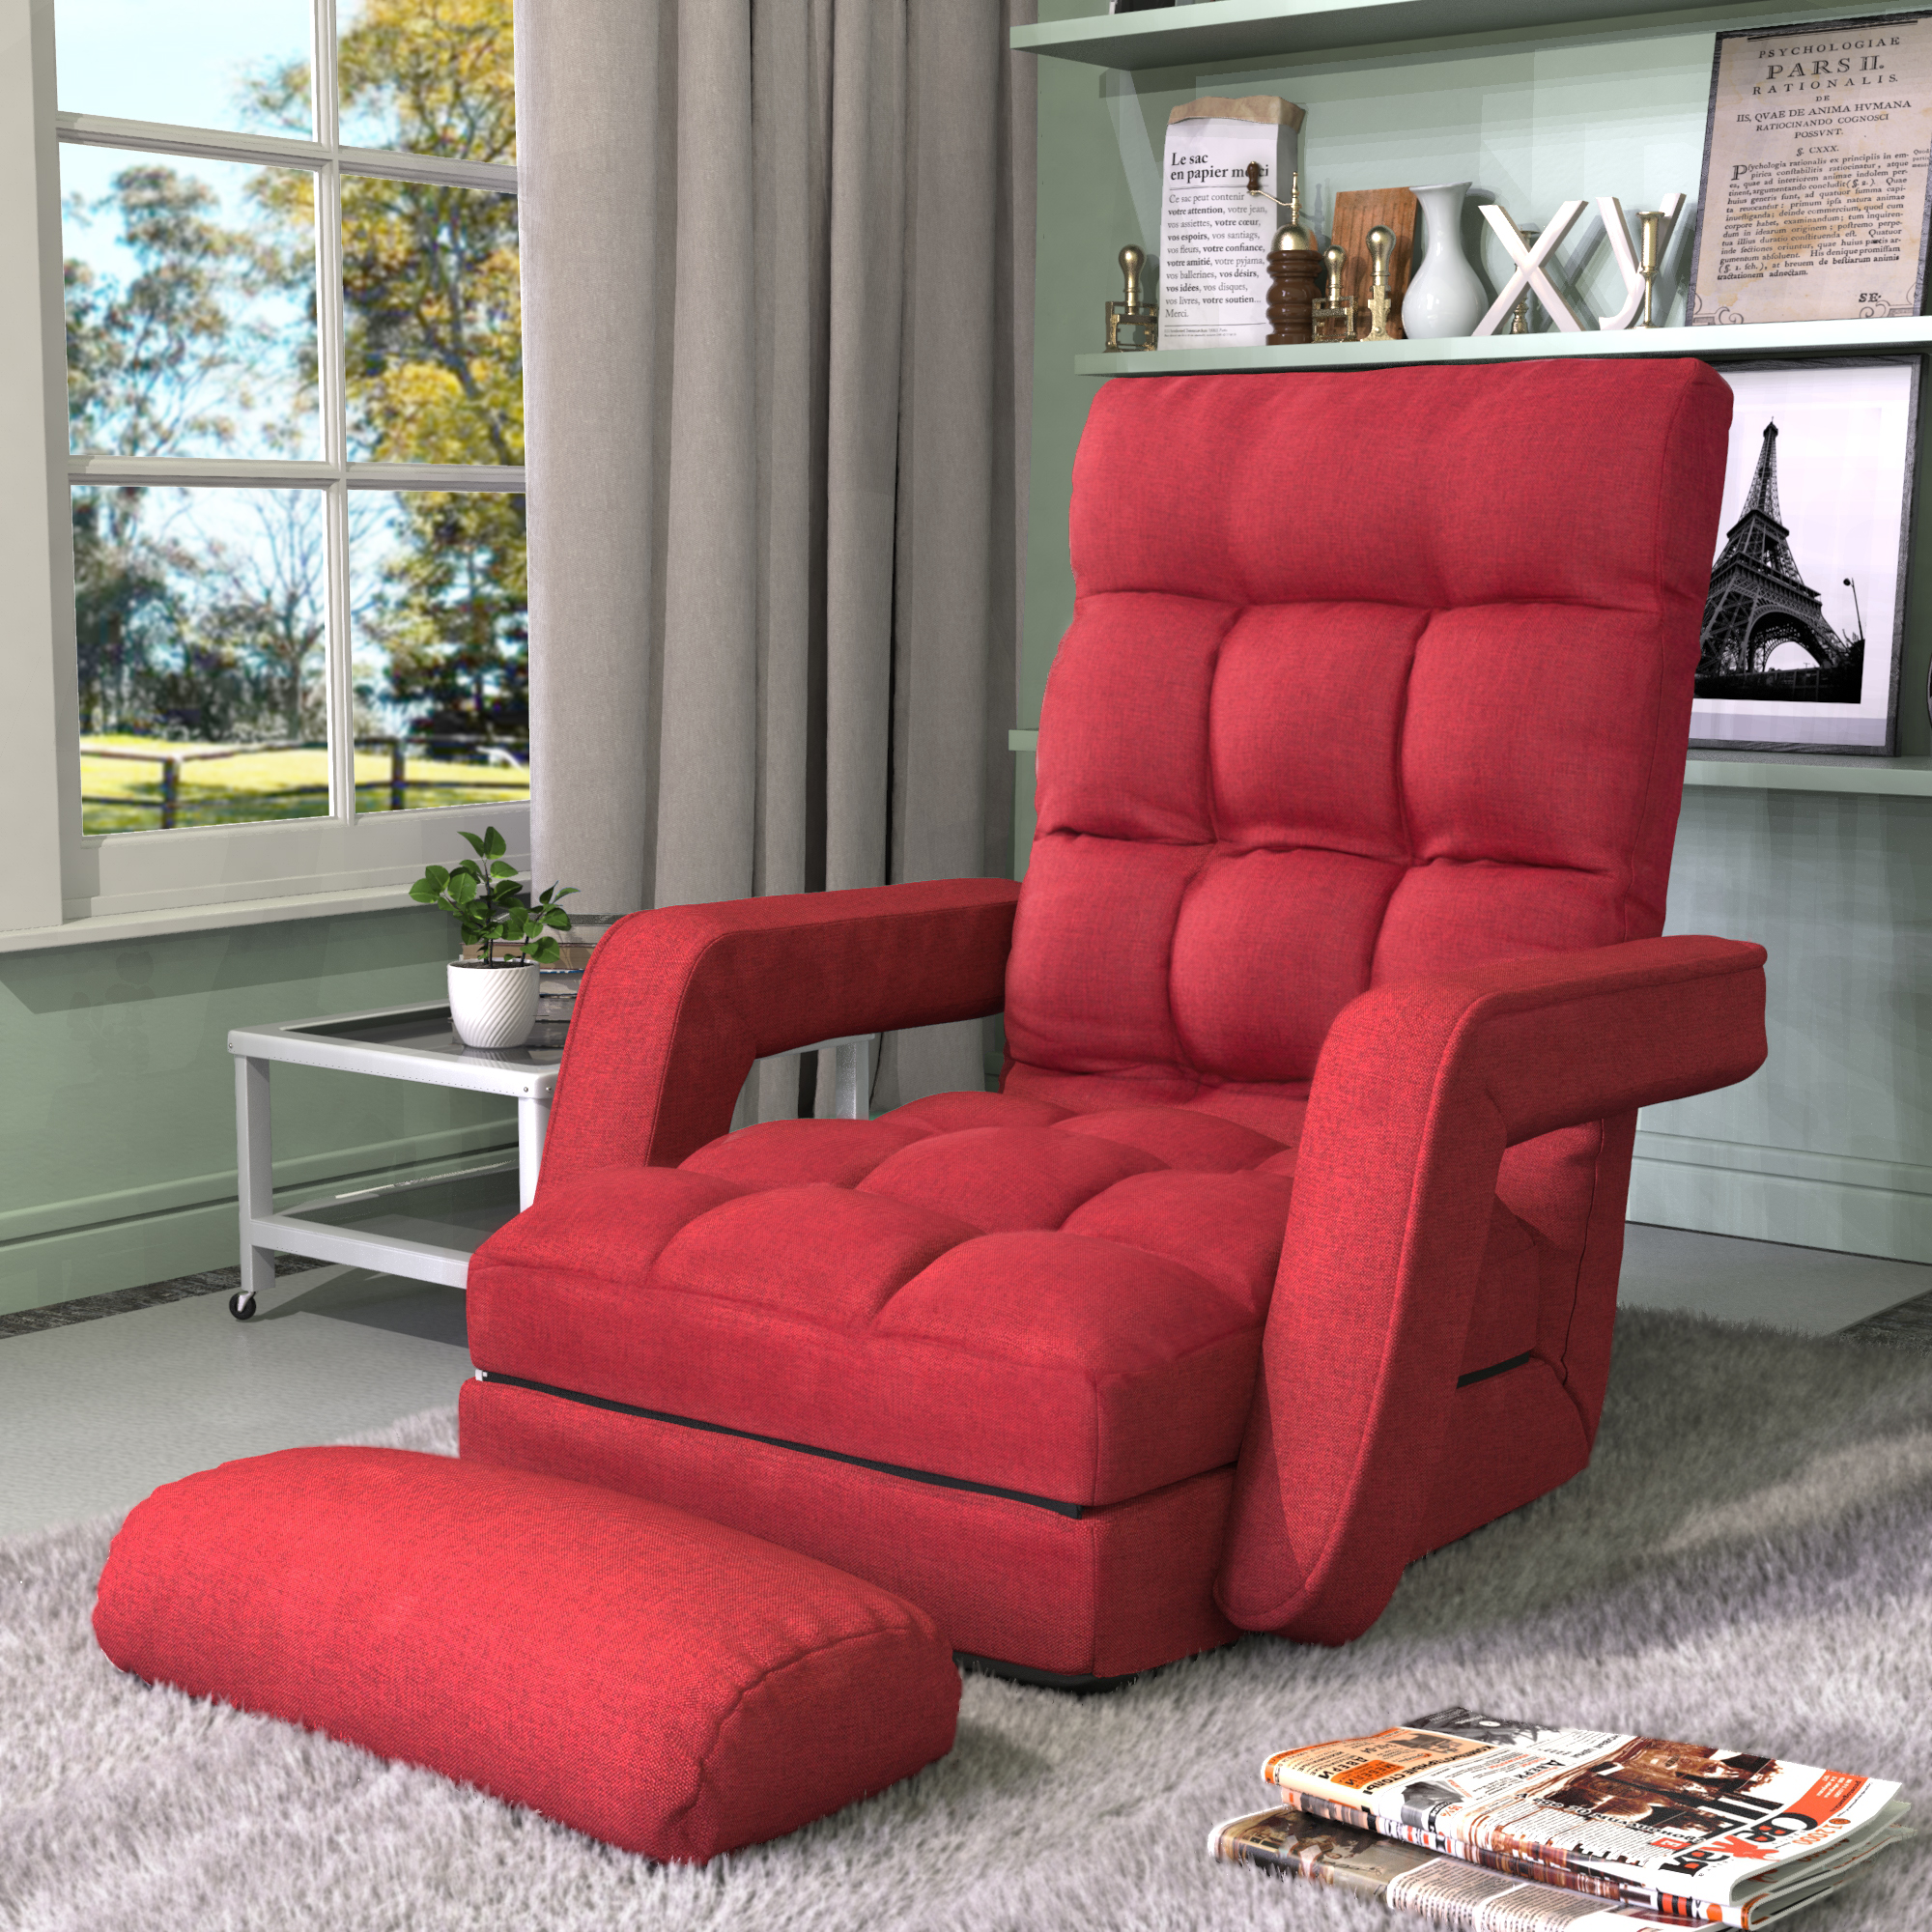 Floor Chair Set with Adjustable Backrest, Folding Chair with Armrests and a Pillow, Lazy Sofa Floor Chair Sofa Lounger Couch for Living Room Bedroom Dorm Office, No Assembly Required, Red, Q6294 - image 4 of 10